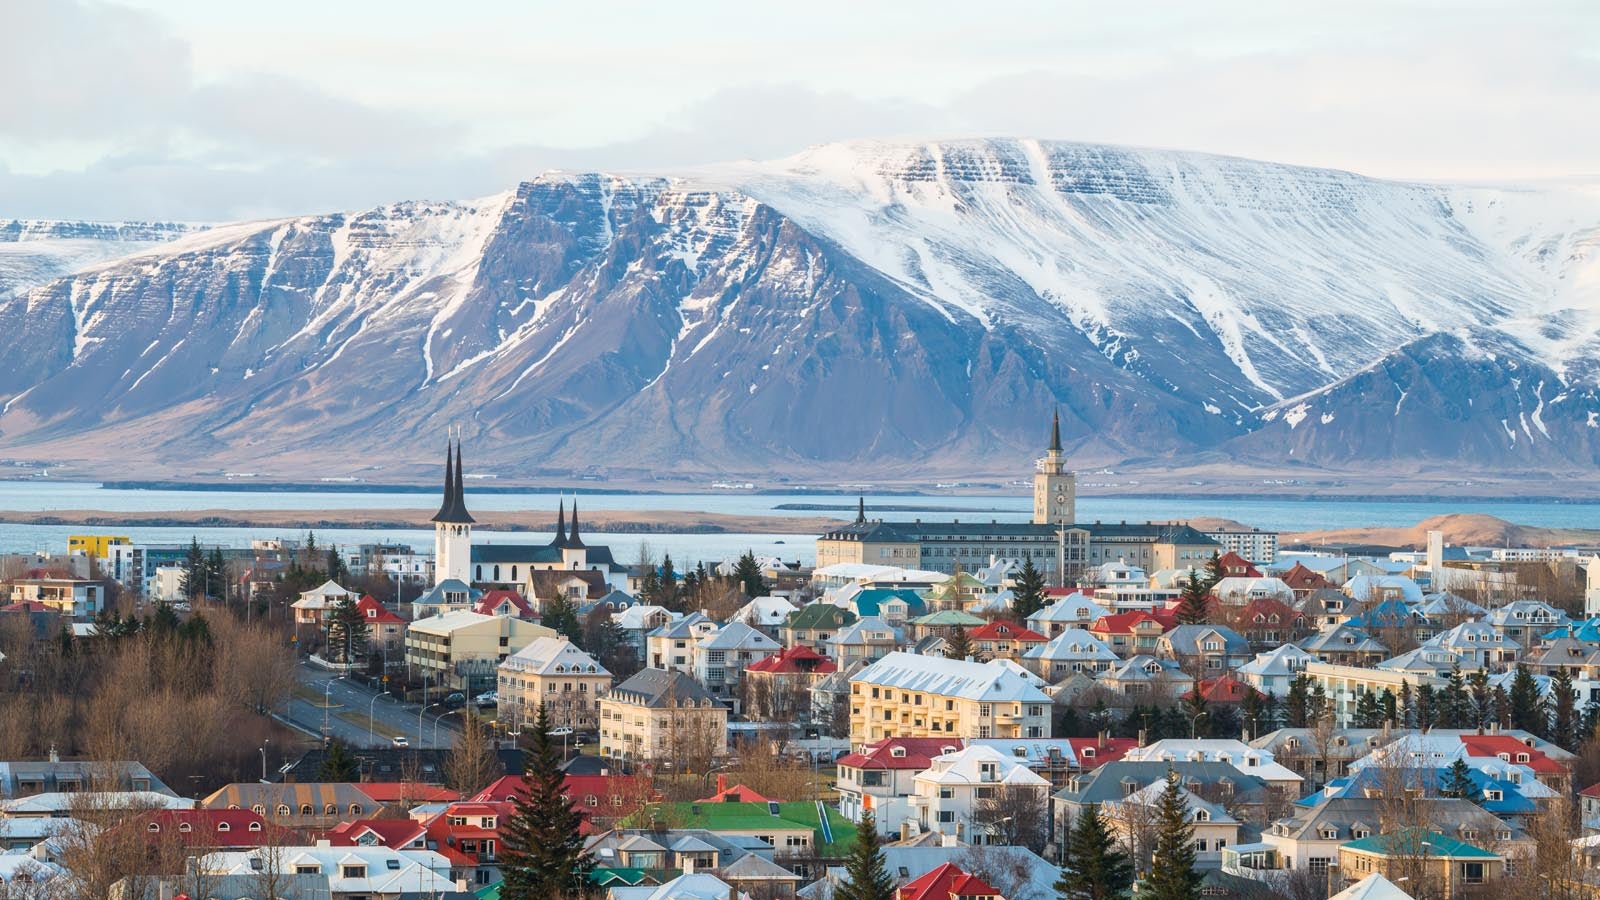 Nordic landscape showing town and snowy mountains